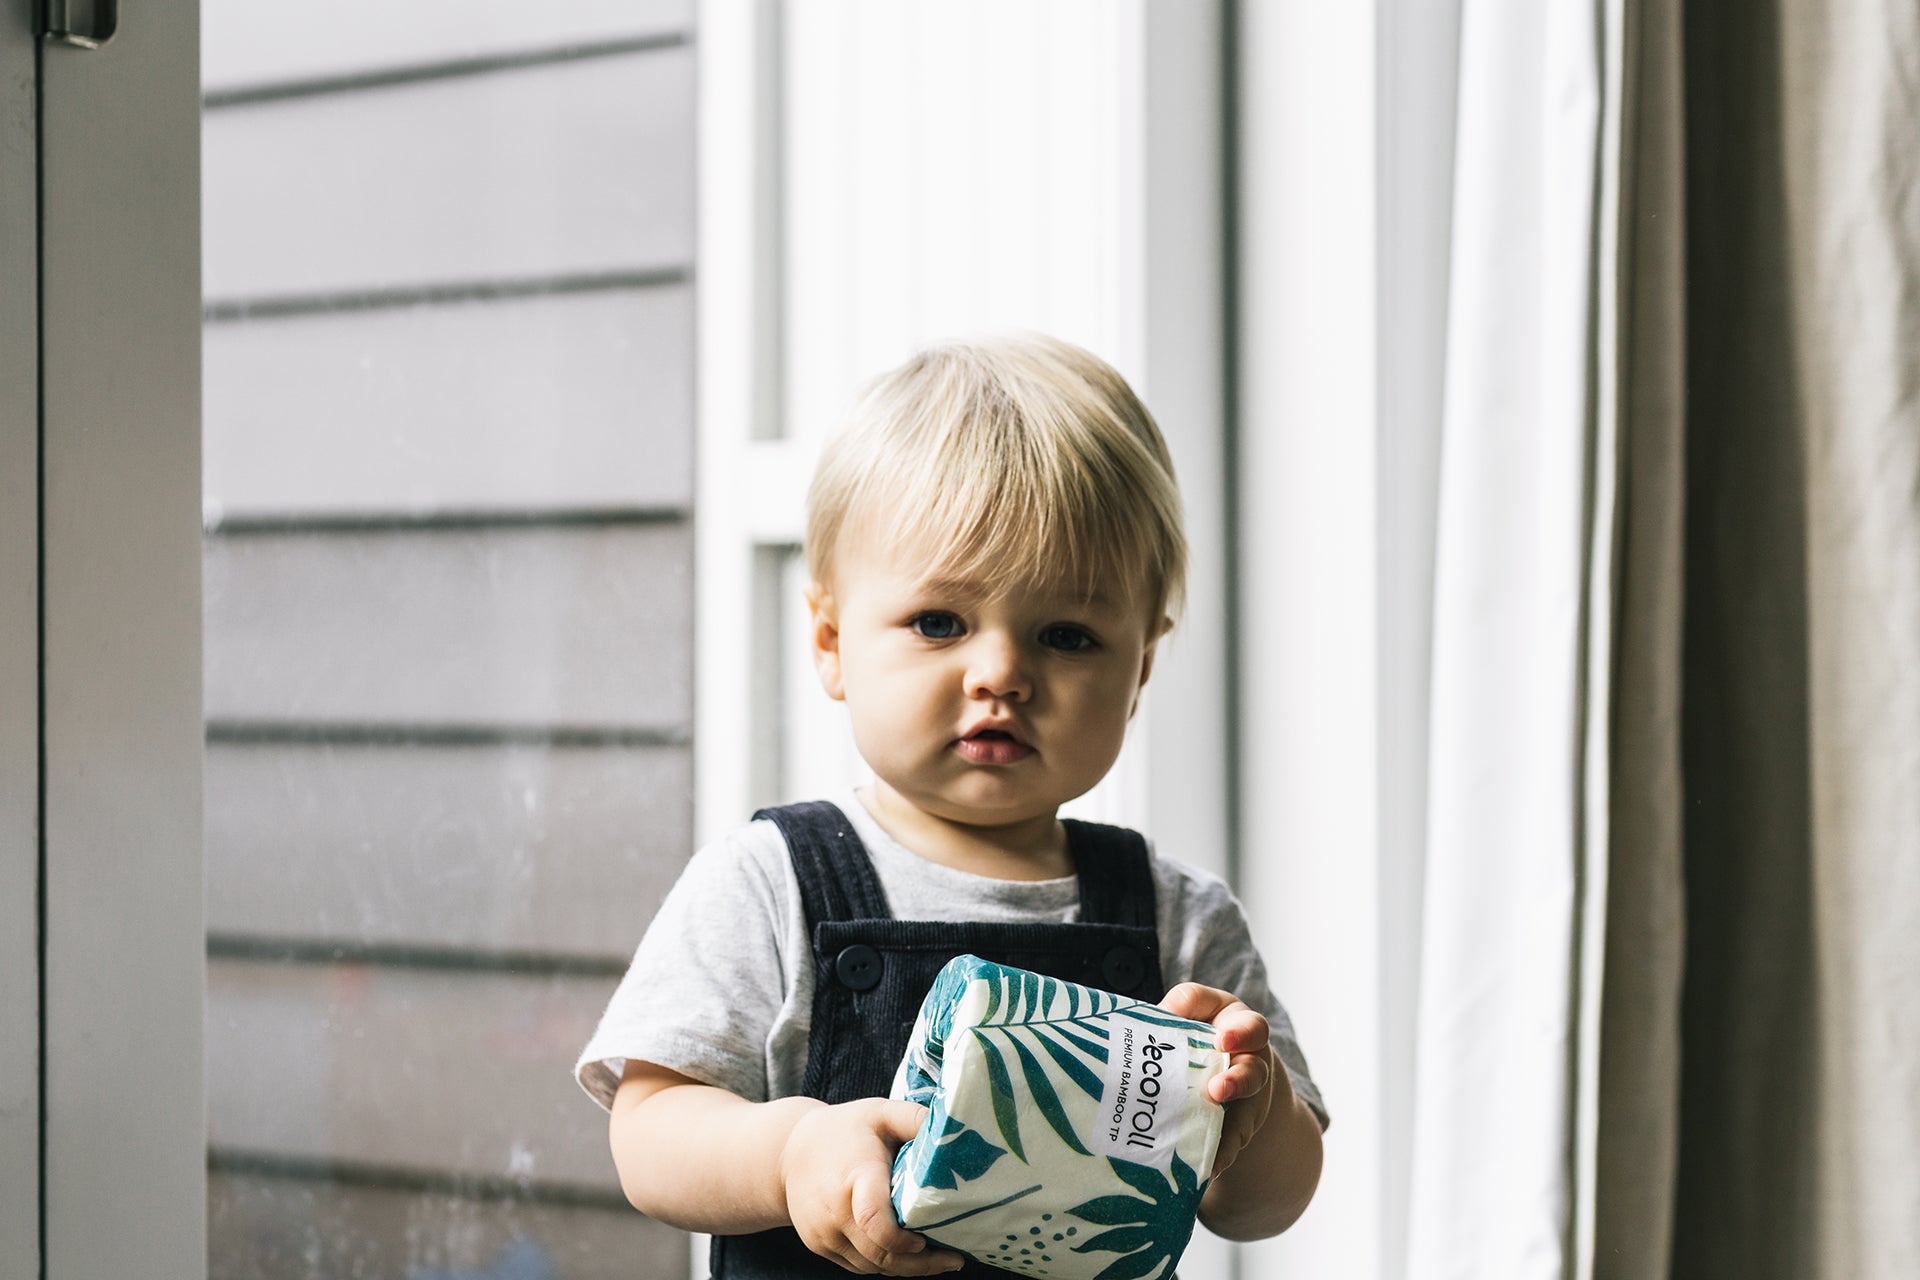 Image of a toddler, holding a sustainable toilet paper roll